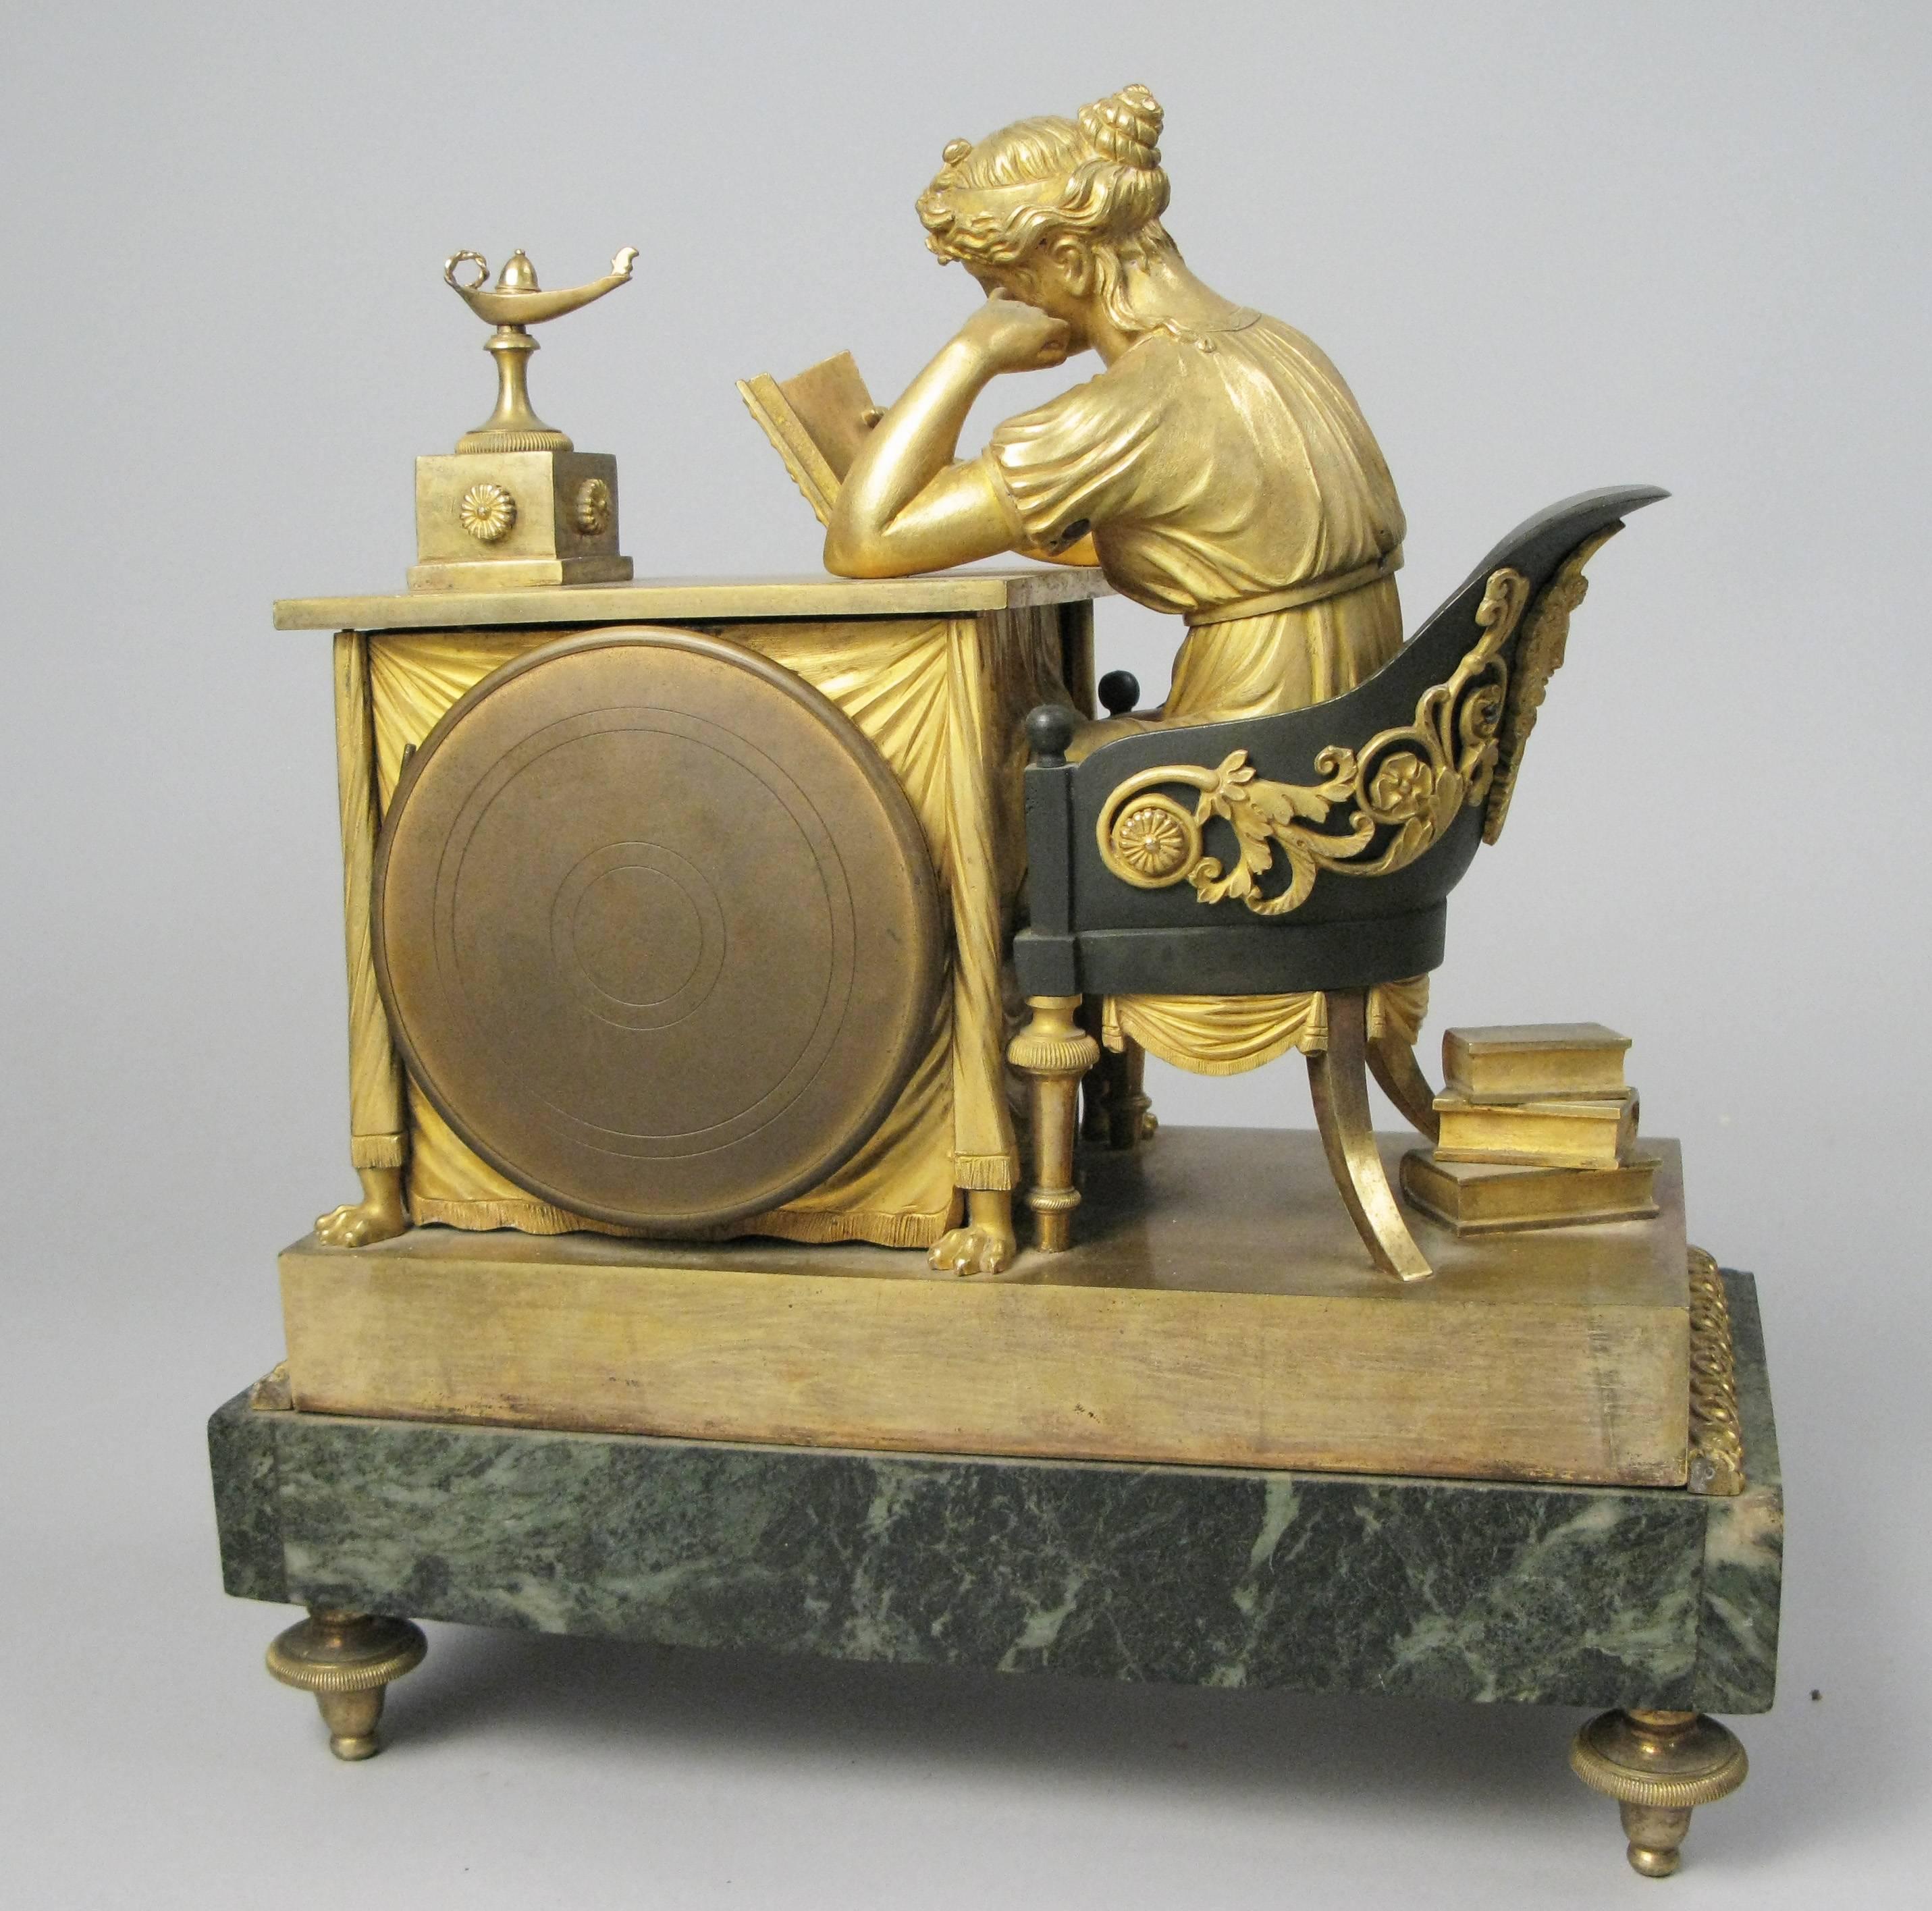 Antique 19th Century French Empire Gilt Bronze and Marble Mantel Clock 6